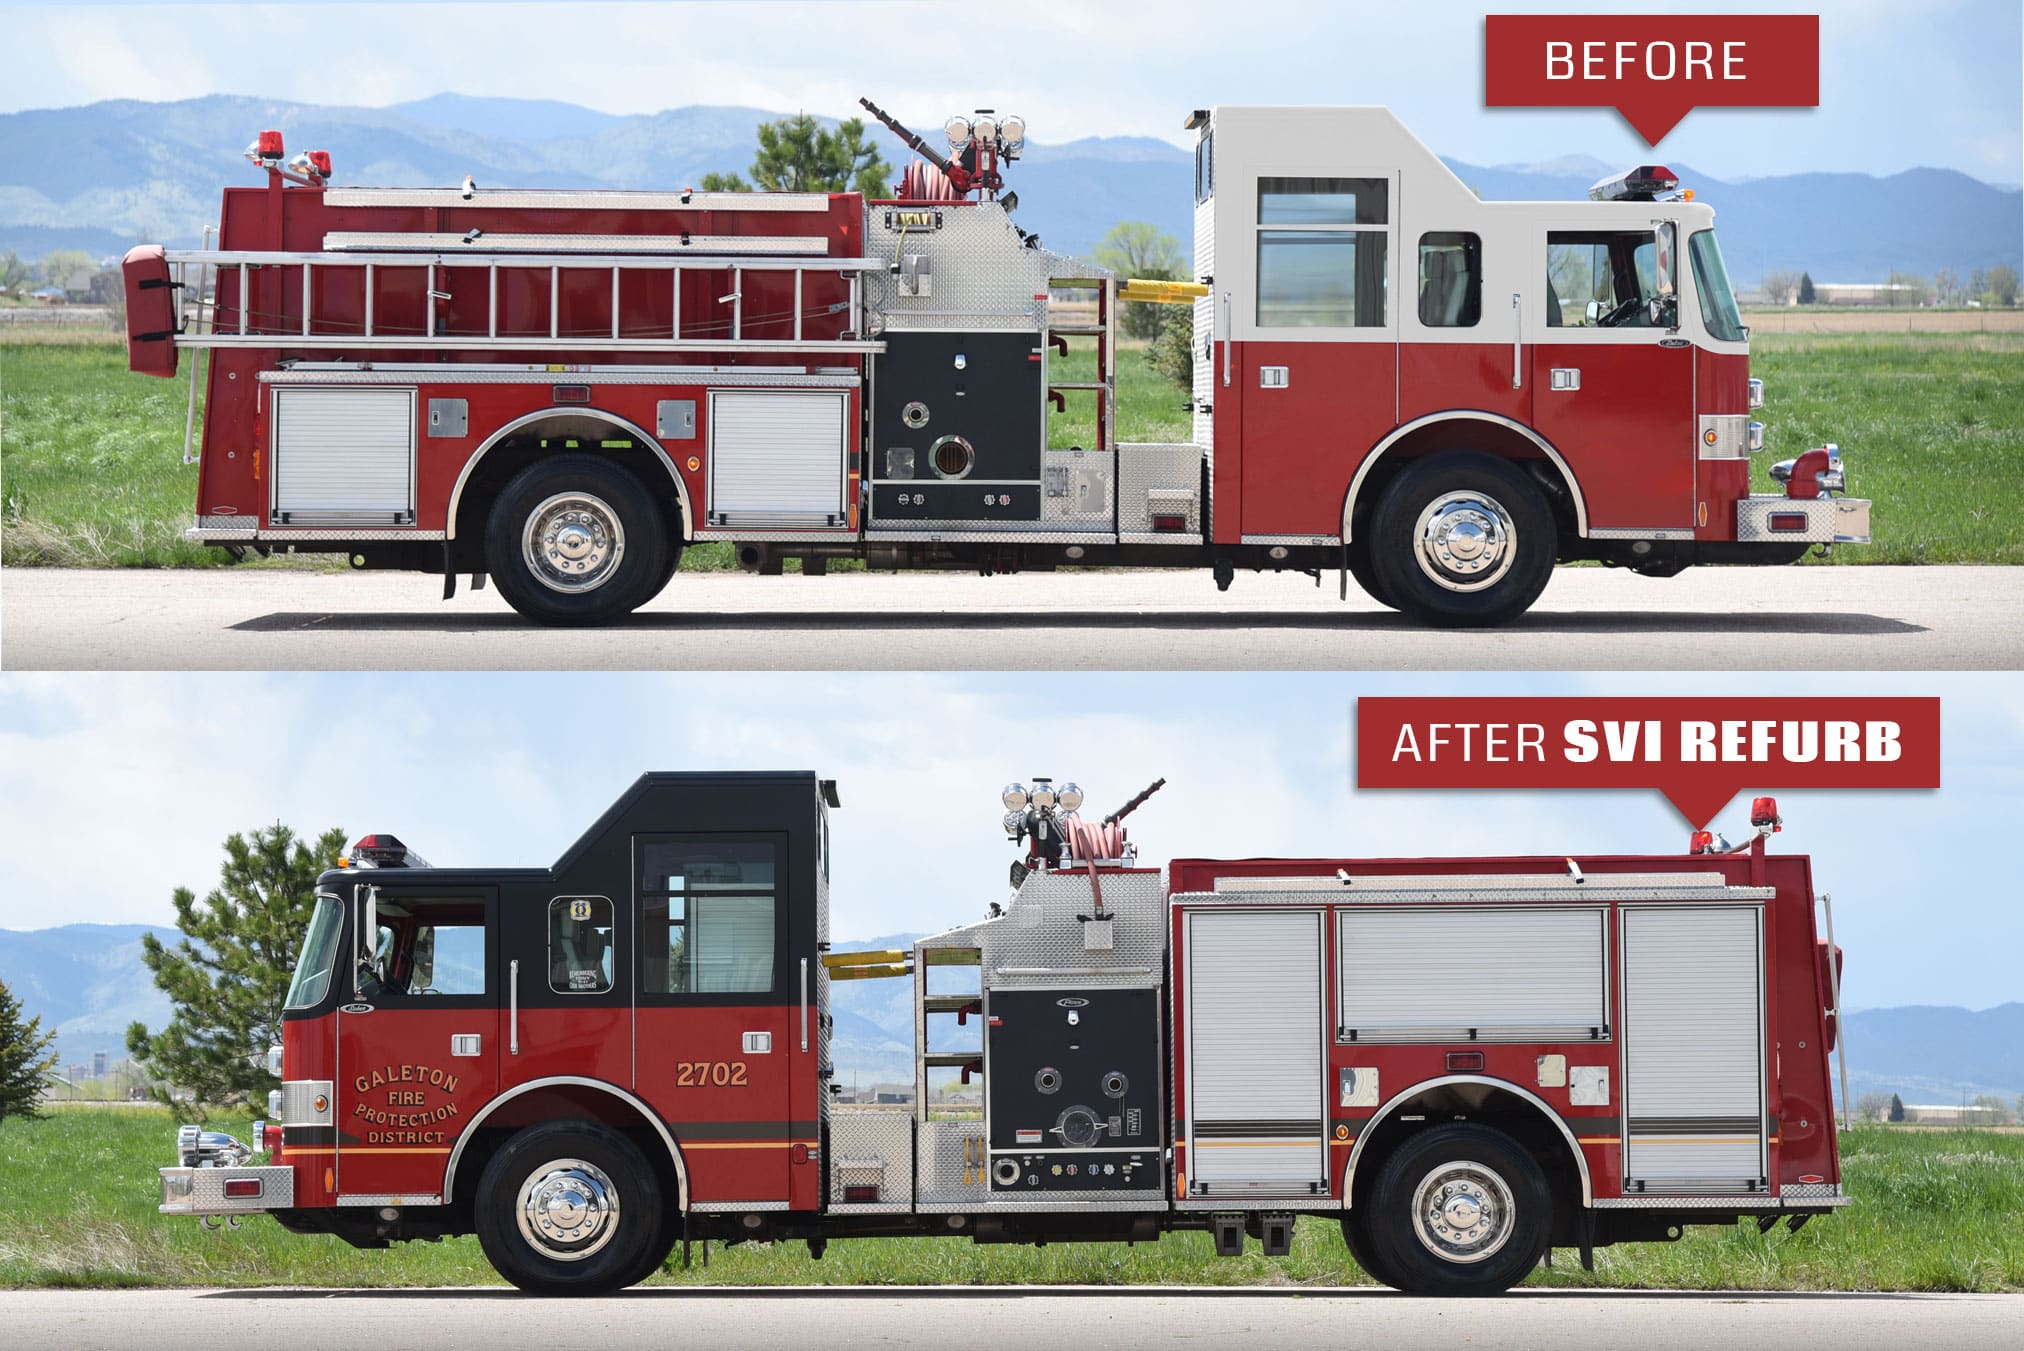 Featured image for “Galeton, CO Pumper Refurb”